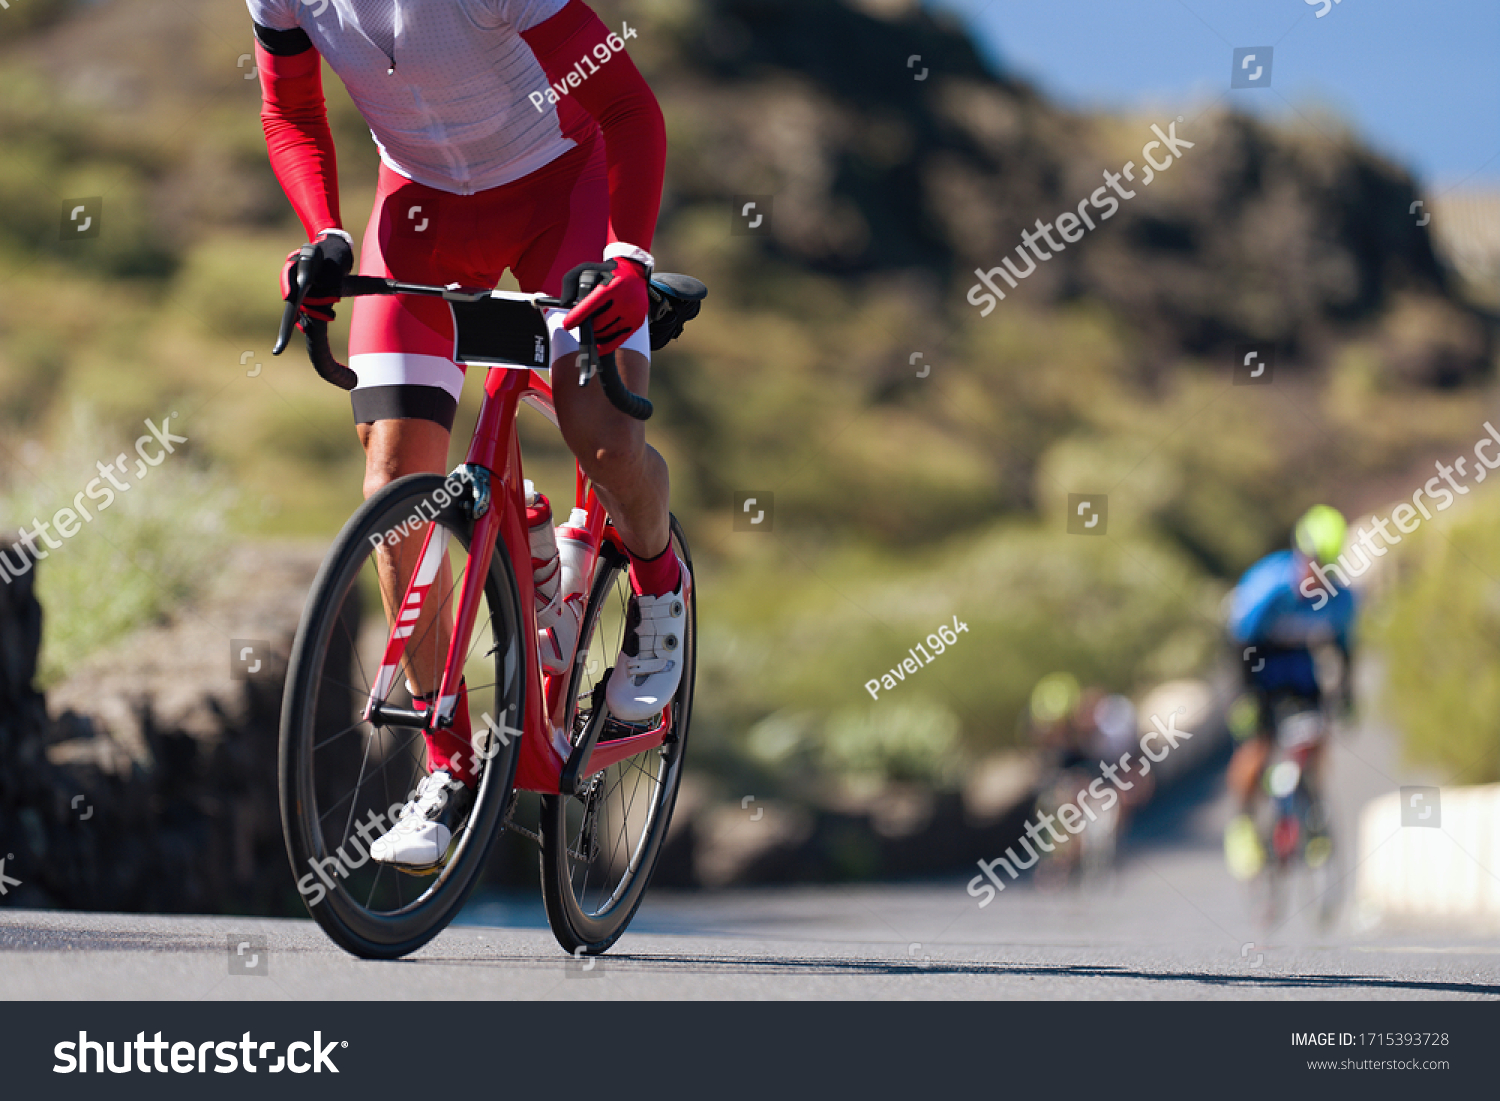 Cycling competition,cyclist athletes riding a race, climbing up a hill on a bicycle #1715393728